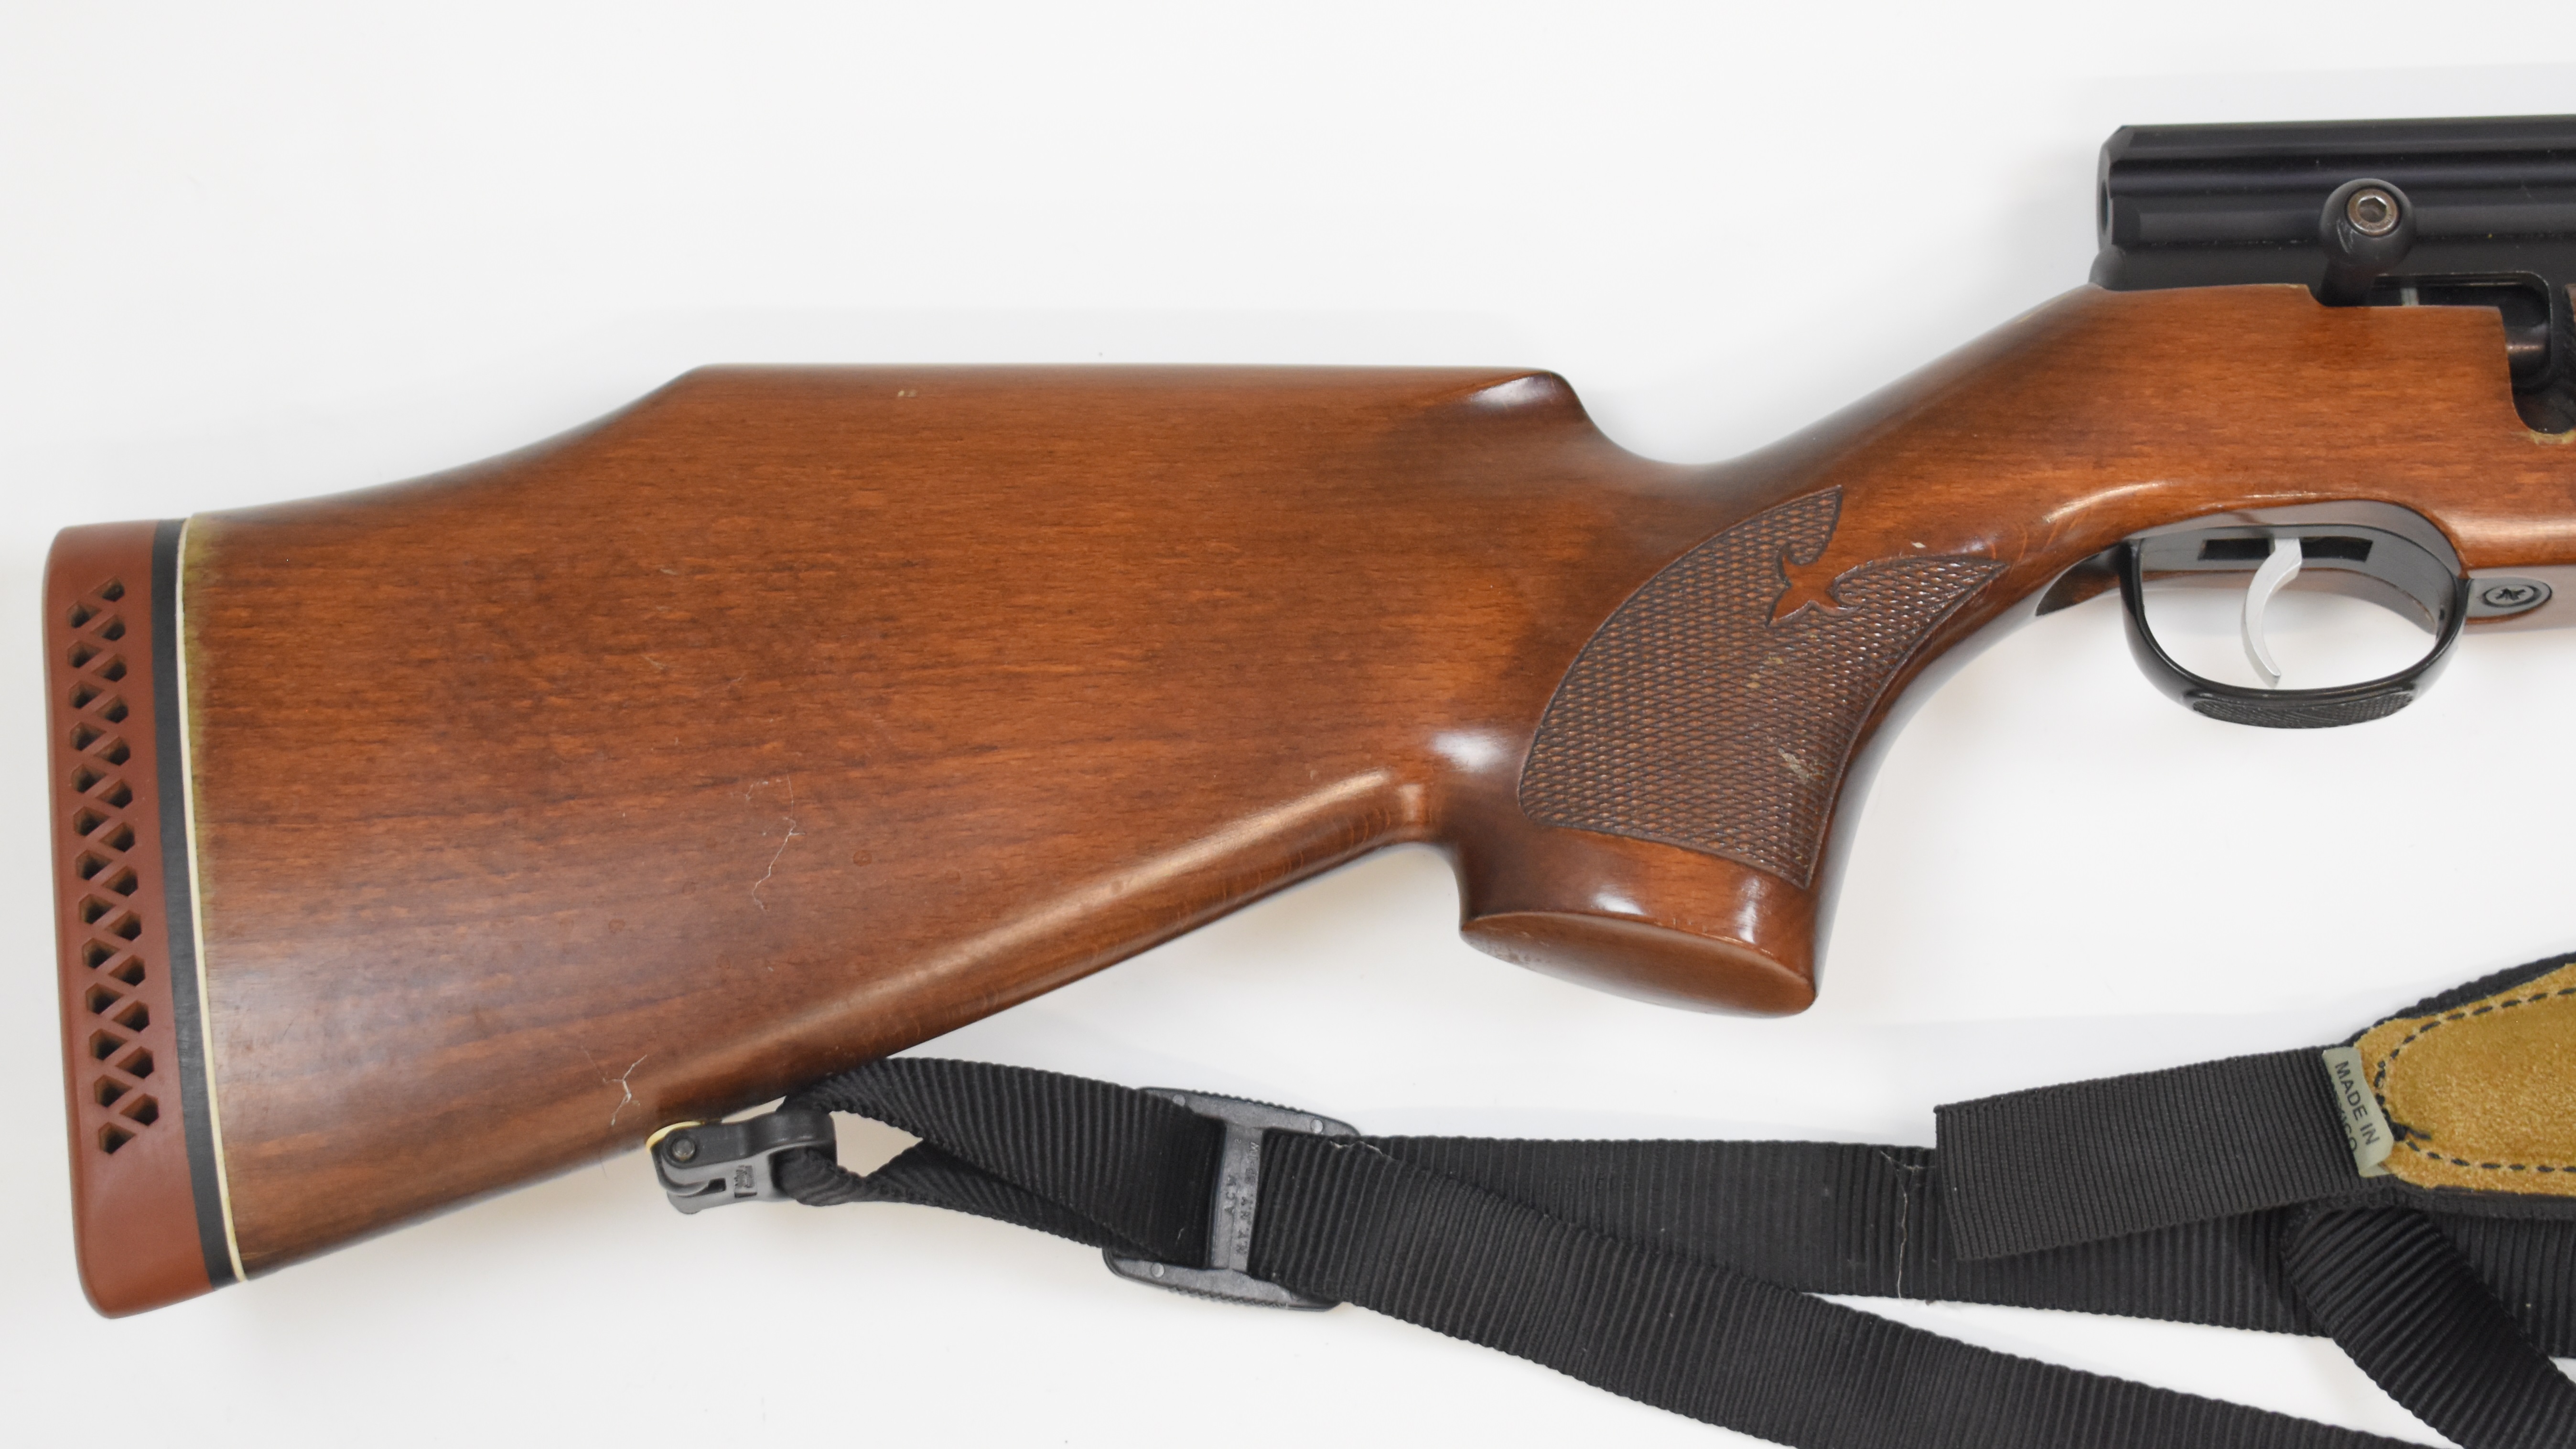 Webley Axsor .22 PCP air rifle with chequered semi-pistol grip and forend, raised cheek piece, - Image 3 of 20